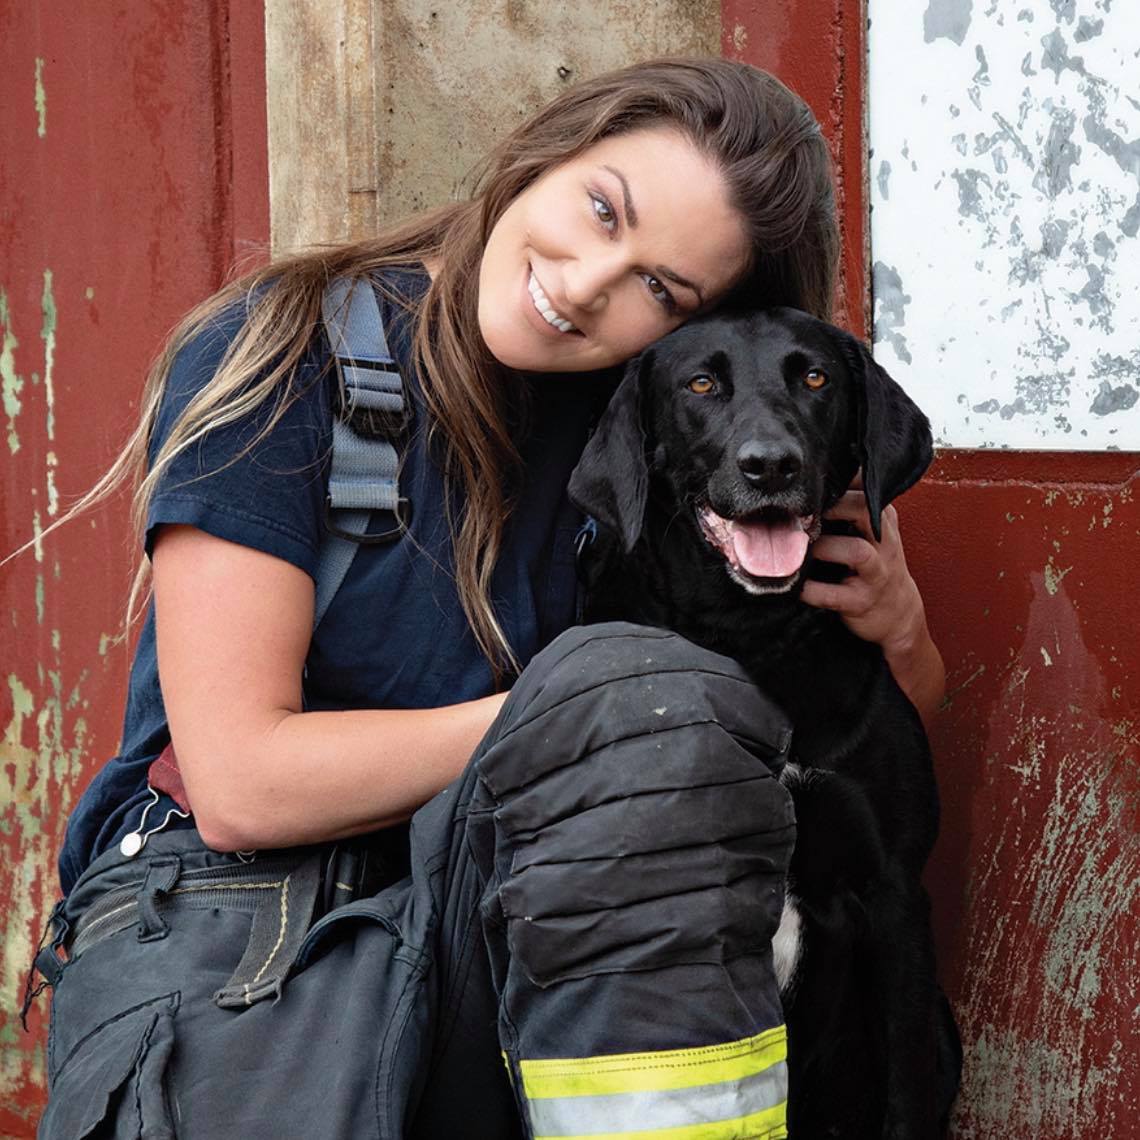 Sandra Rollings wearing a firefighter's uniform with a dog.